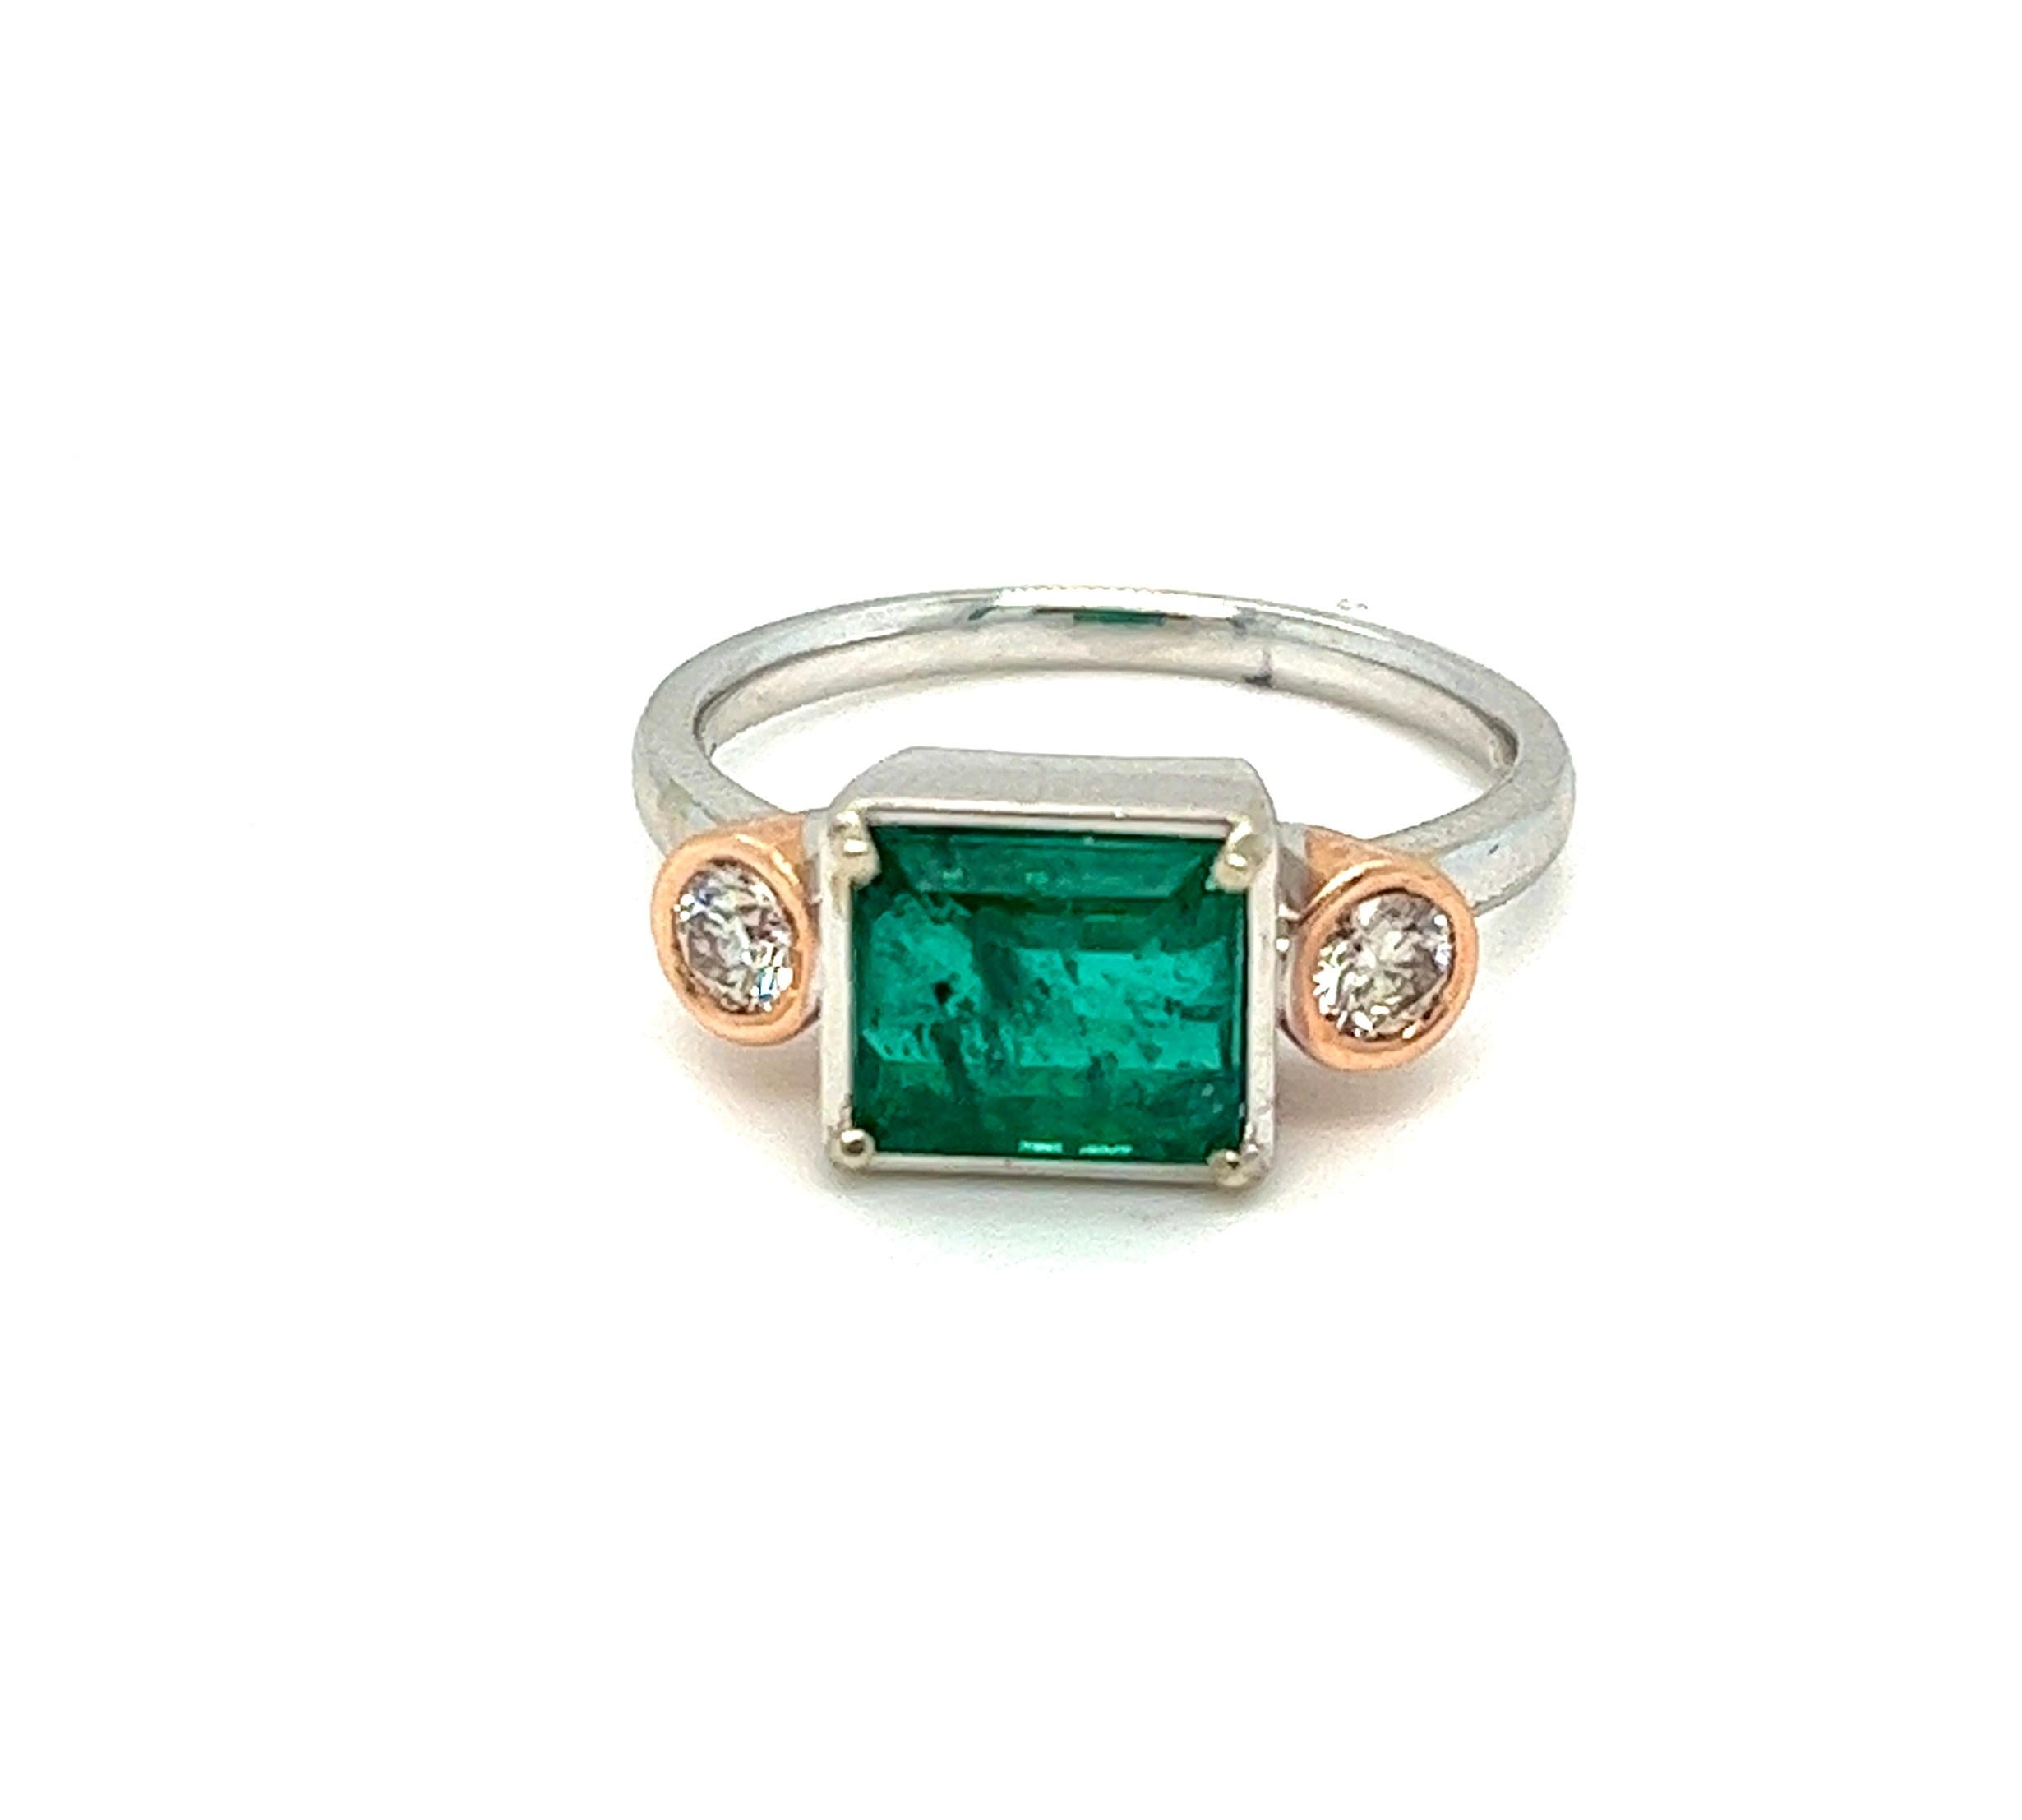 Offered here is natural earth mined Emerald from Colombia, weighing 2.56 carats, stunning deep green in color with natural inclusions.
Emerald is set within a 4 prong basket flanked with 2 natural earth mined diamonds weighing 0.30 carat together,